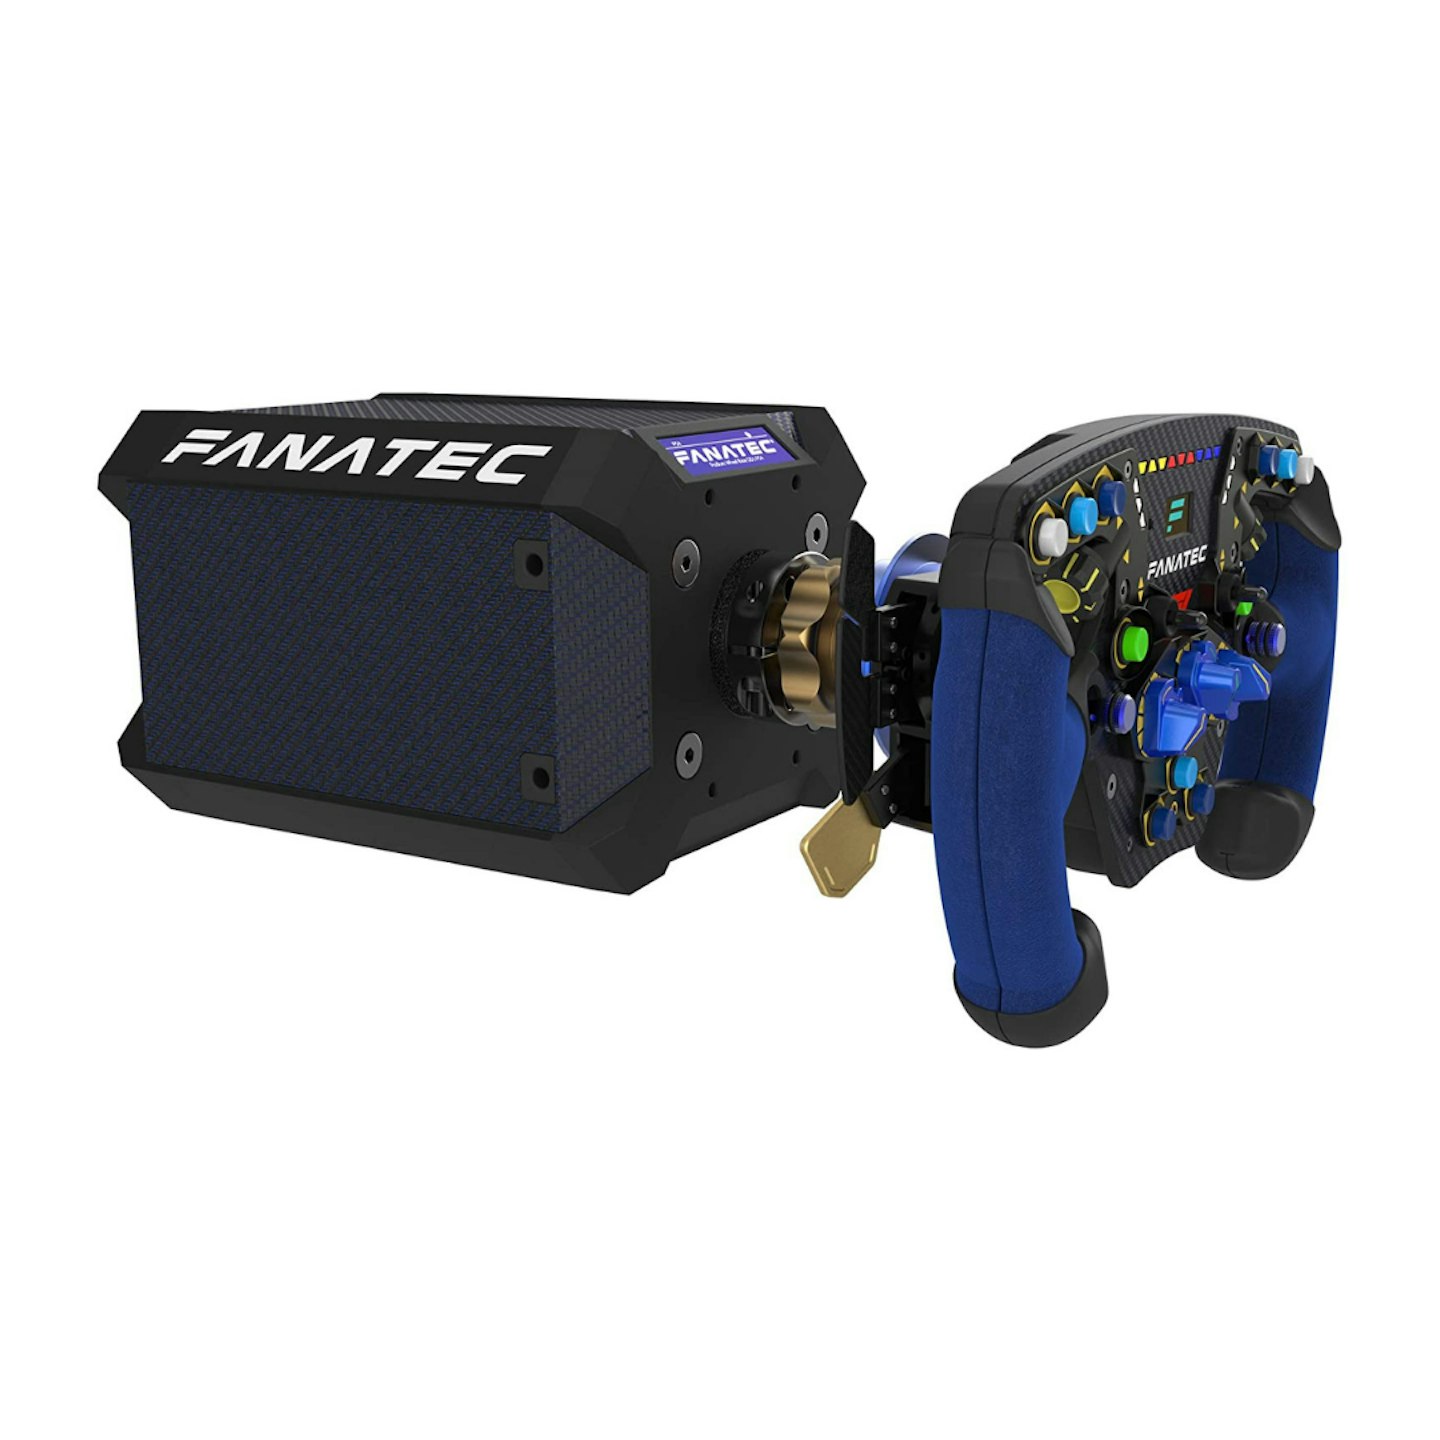 CAR tests the Fanatec Podium DD1, is it worth the money?